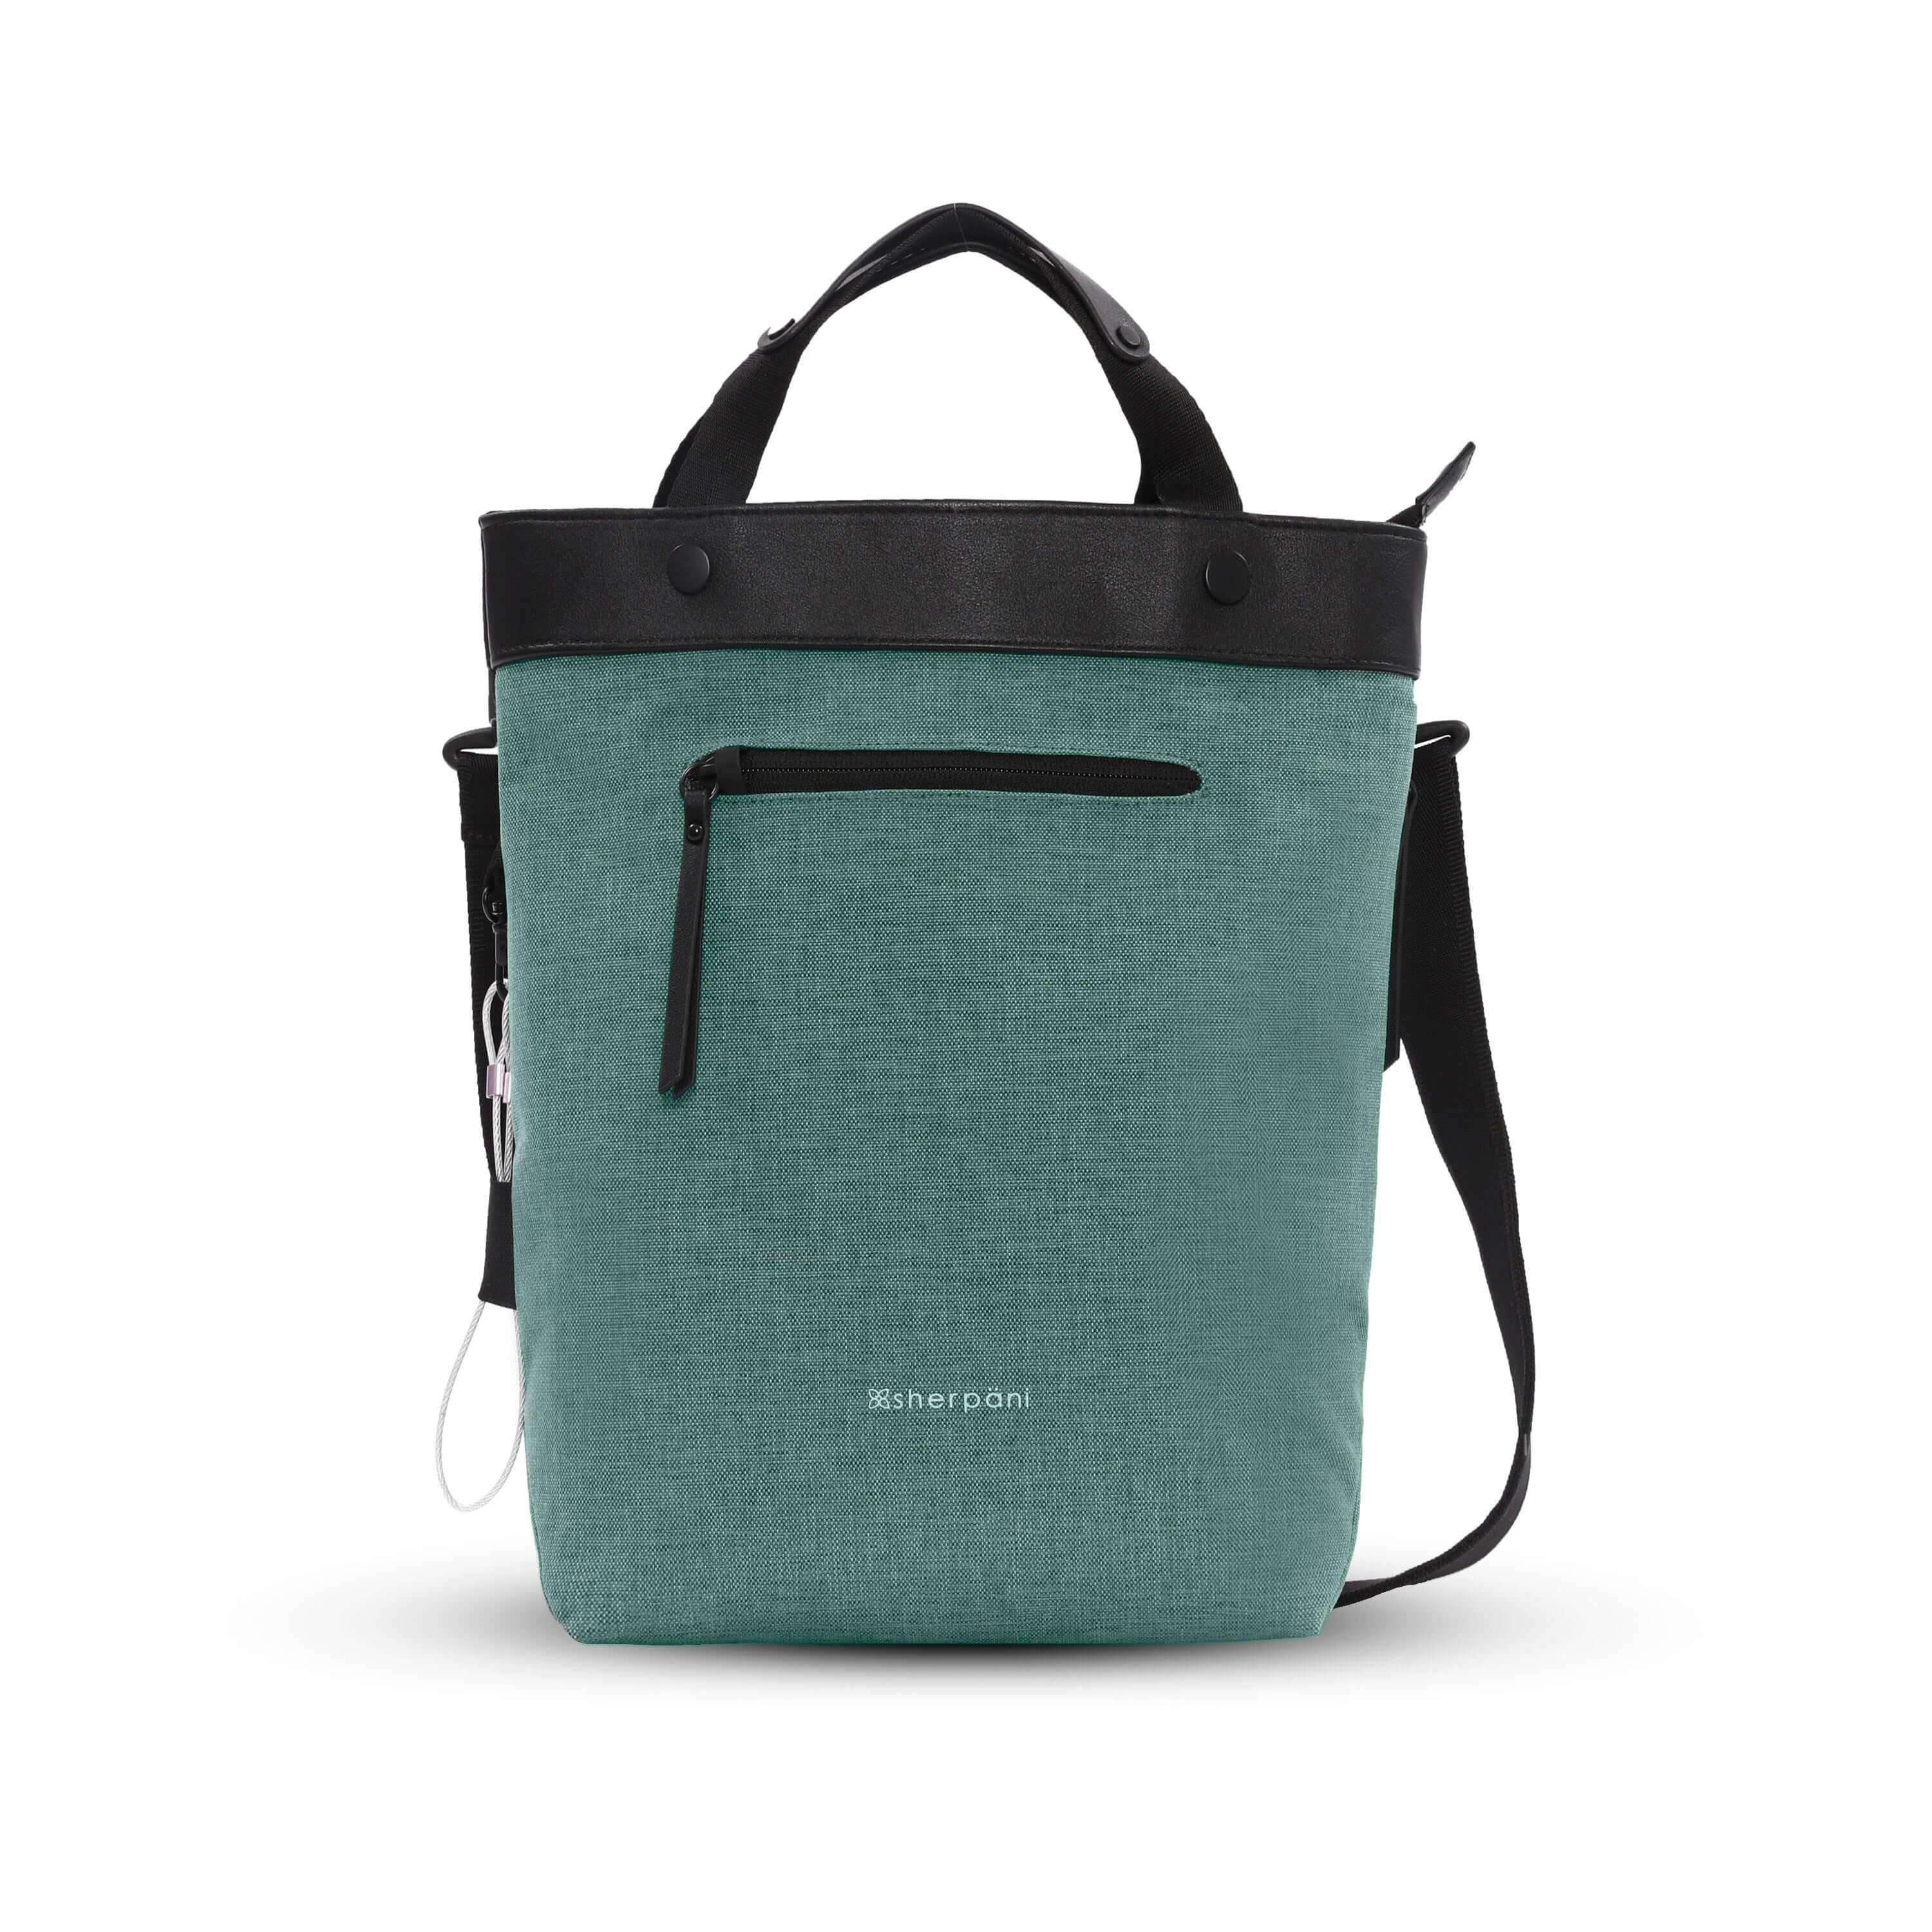 Flat front view of Sherpani's Anti-Theft bag, the Geo AT in Teal, with vegan leather accents in black. The bag features short tote handles and an adjustable/detachable crossbody strap. There is a locking zipper compartment on the front. A chair loop lock is clipped to the side and secured in place by an elastic tab. 